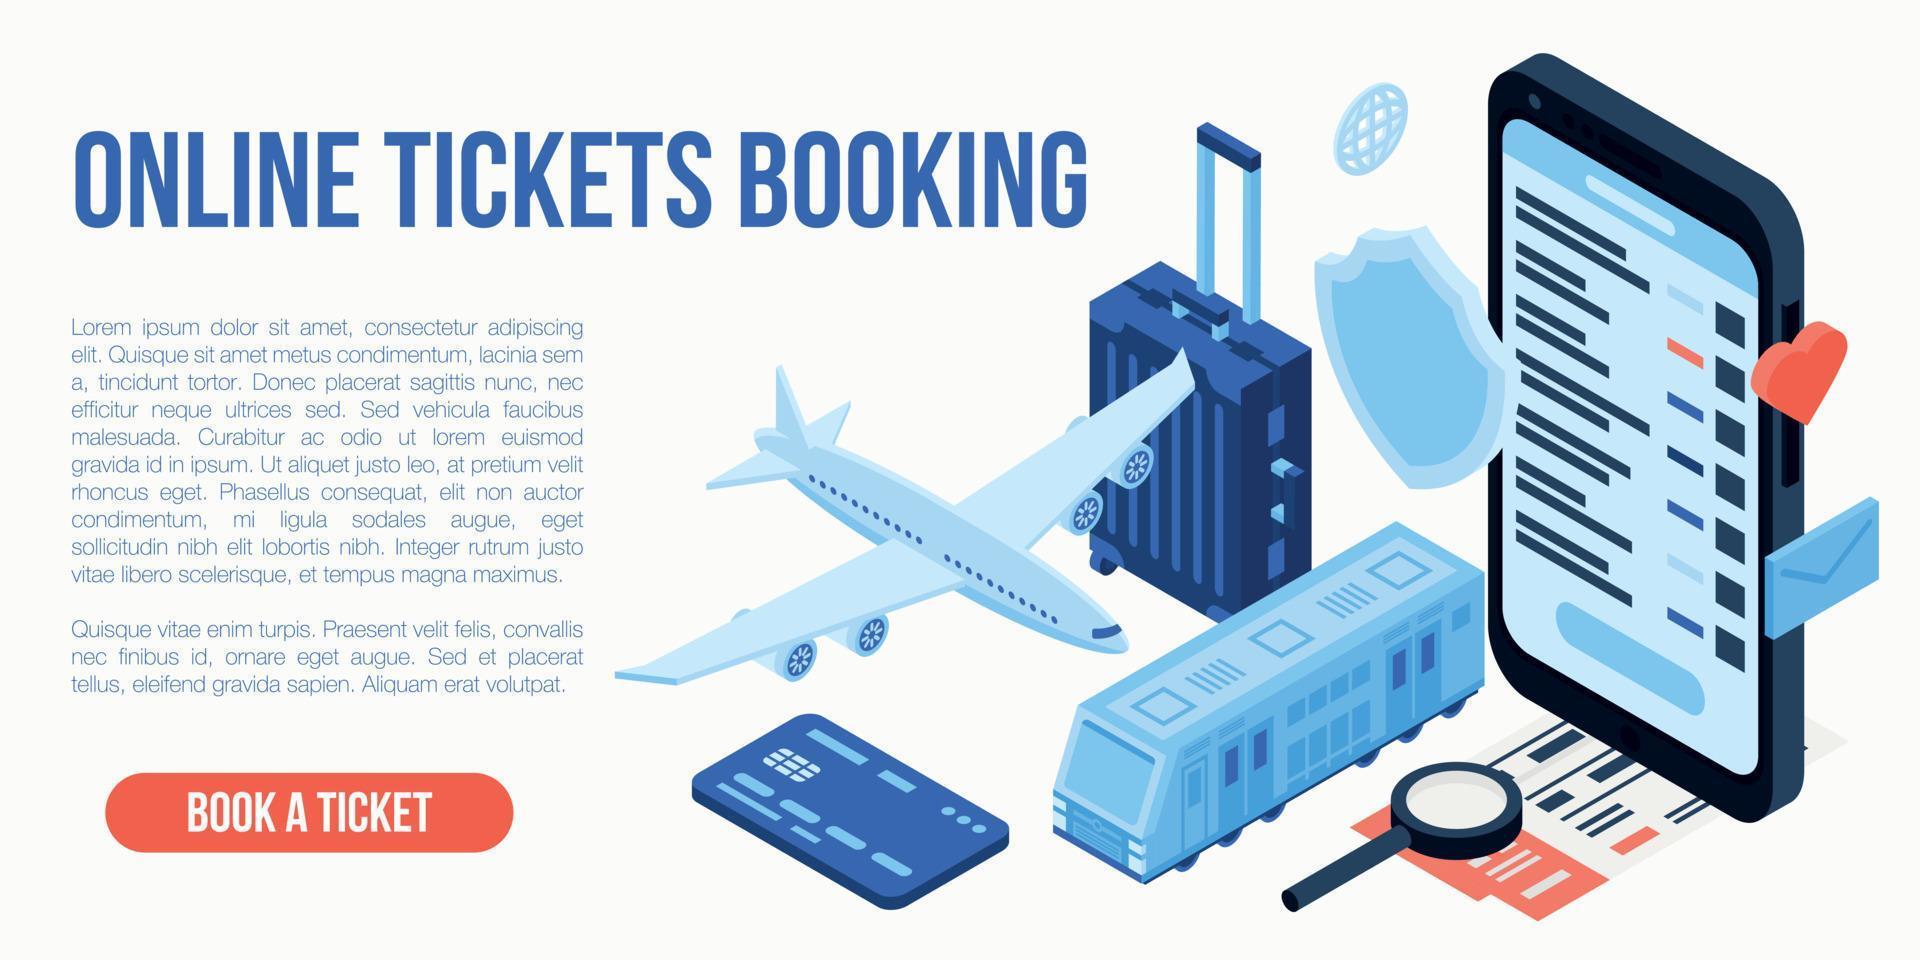 Online tickets booking travel concept background, isometric style vector